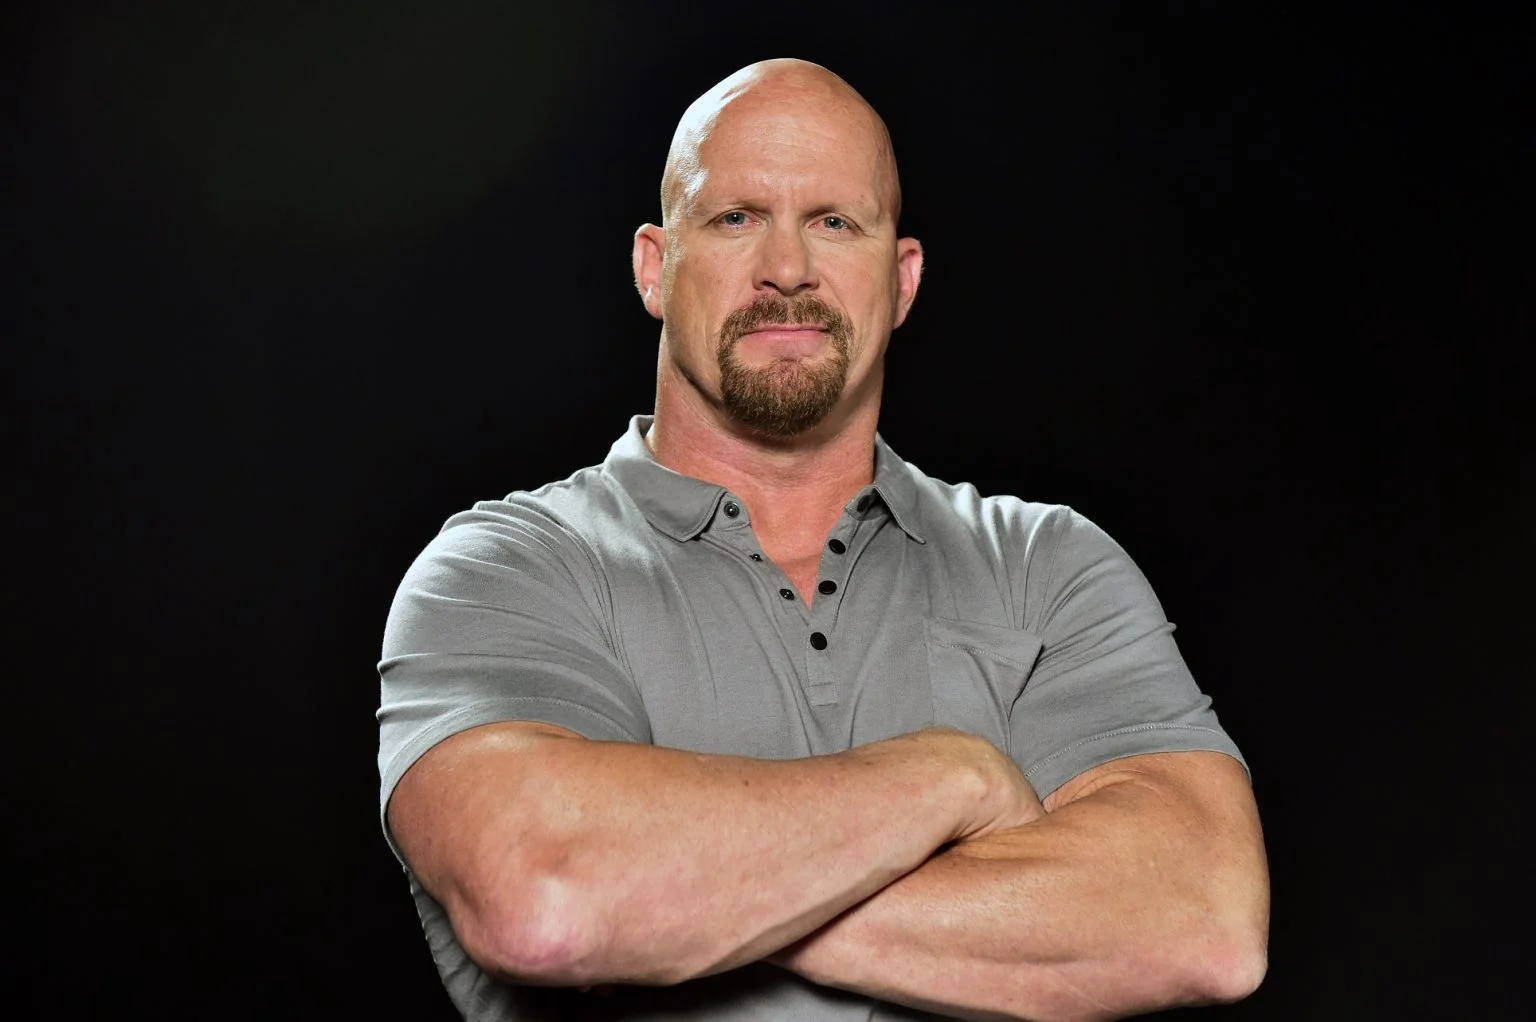 As of March 2024, Steve Austin’s net worth is estimated to be $30 Million.Steve Austin is an American retired professional wrestler, actor, producer, and television host from Austin, Texas. Austin enjoyed a successful mid-card career as “Stunning” Steve Austin in World Championship Wrestling (WCW) from 1991 to 1995.